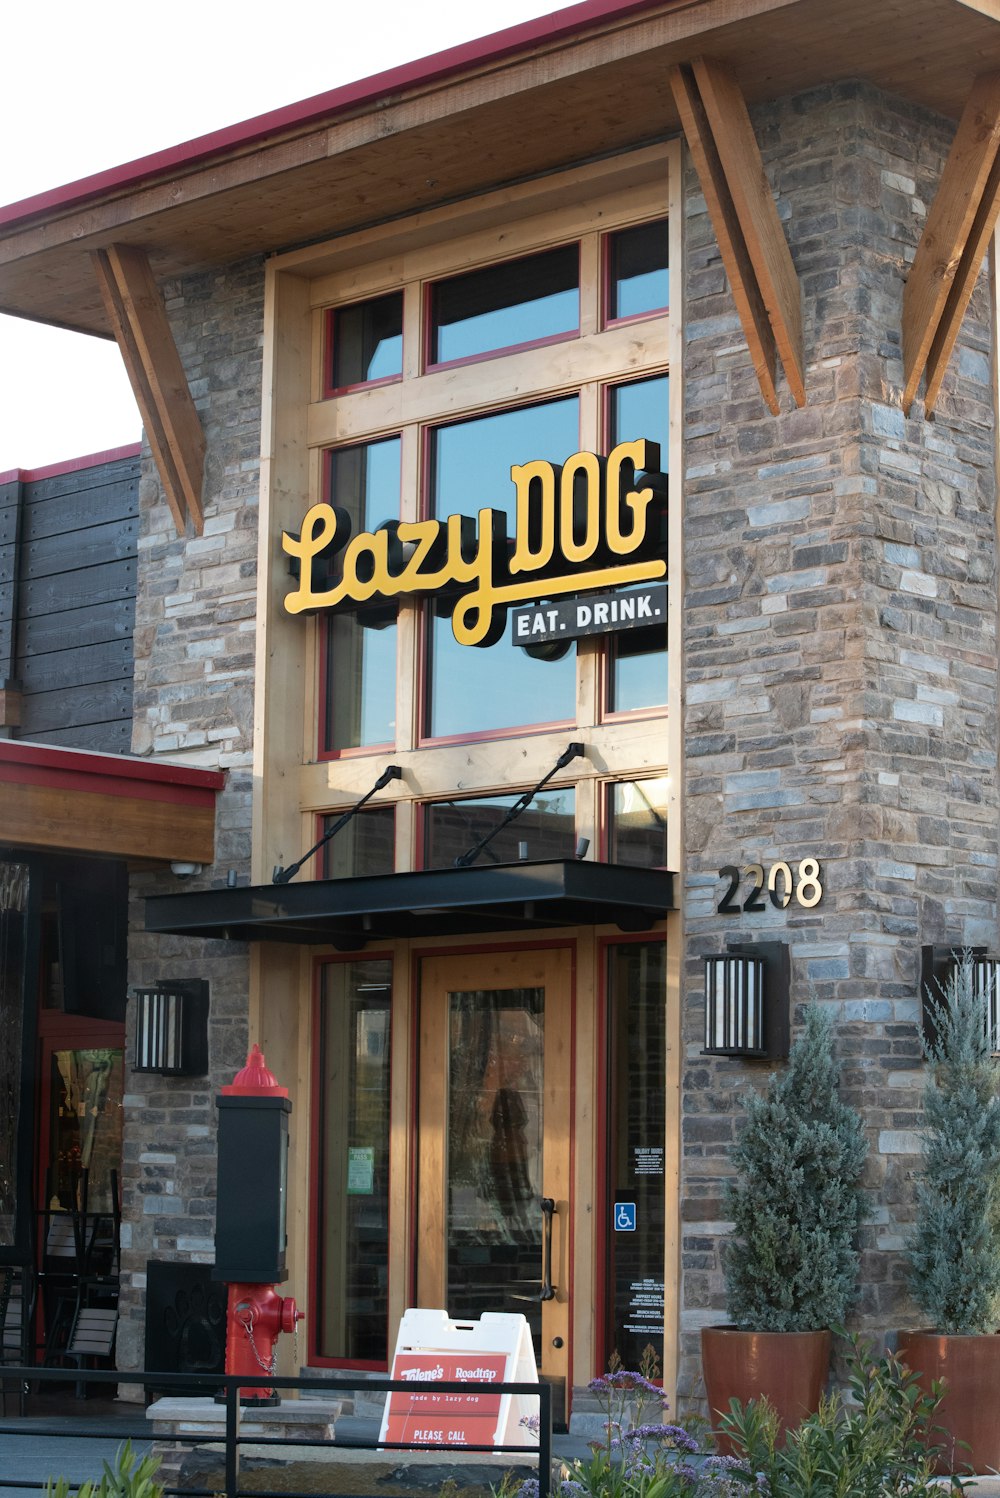 the front of a restaurant with a sign that says lazy dog